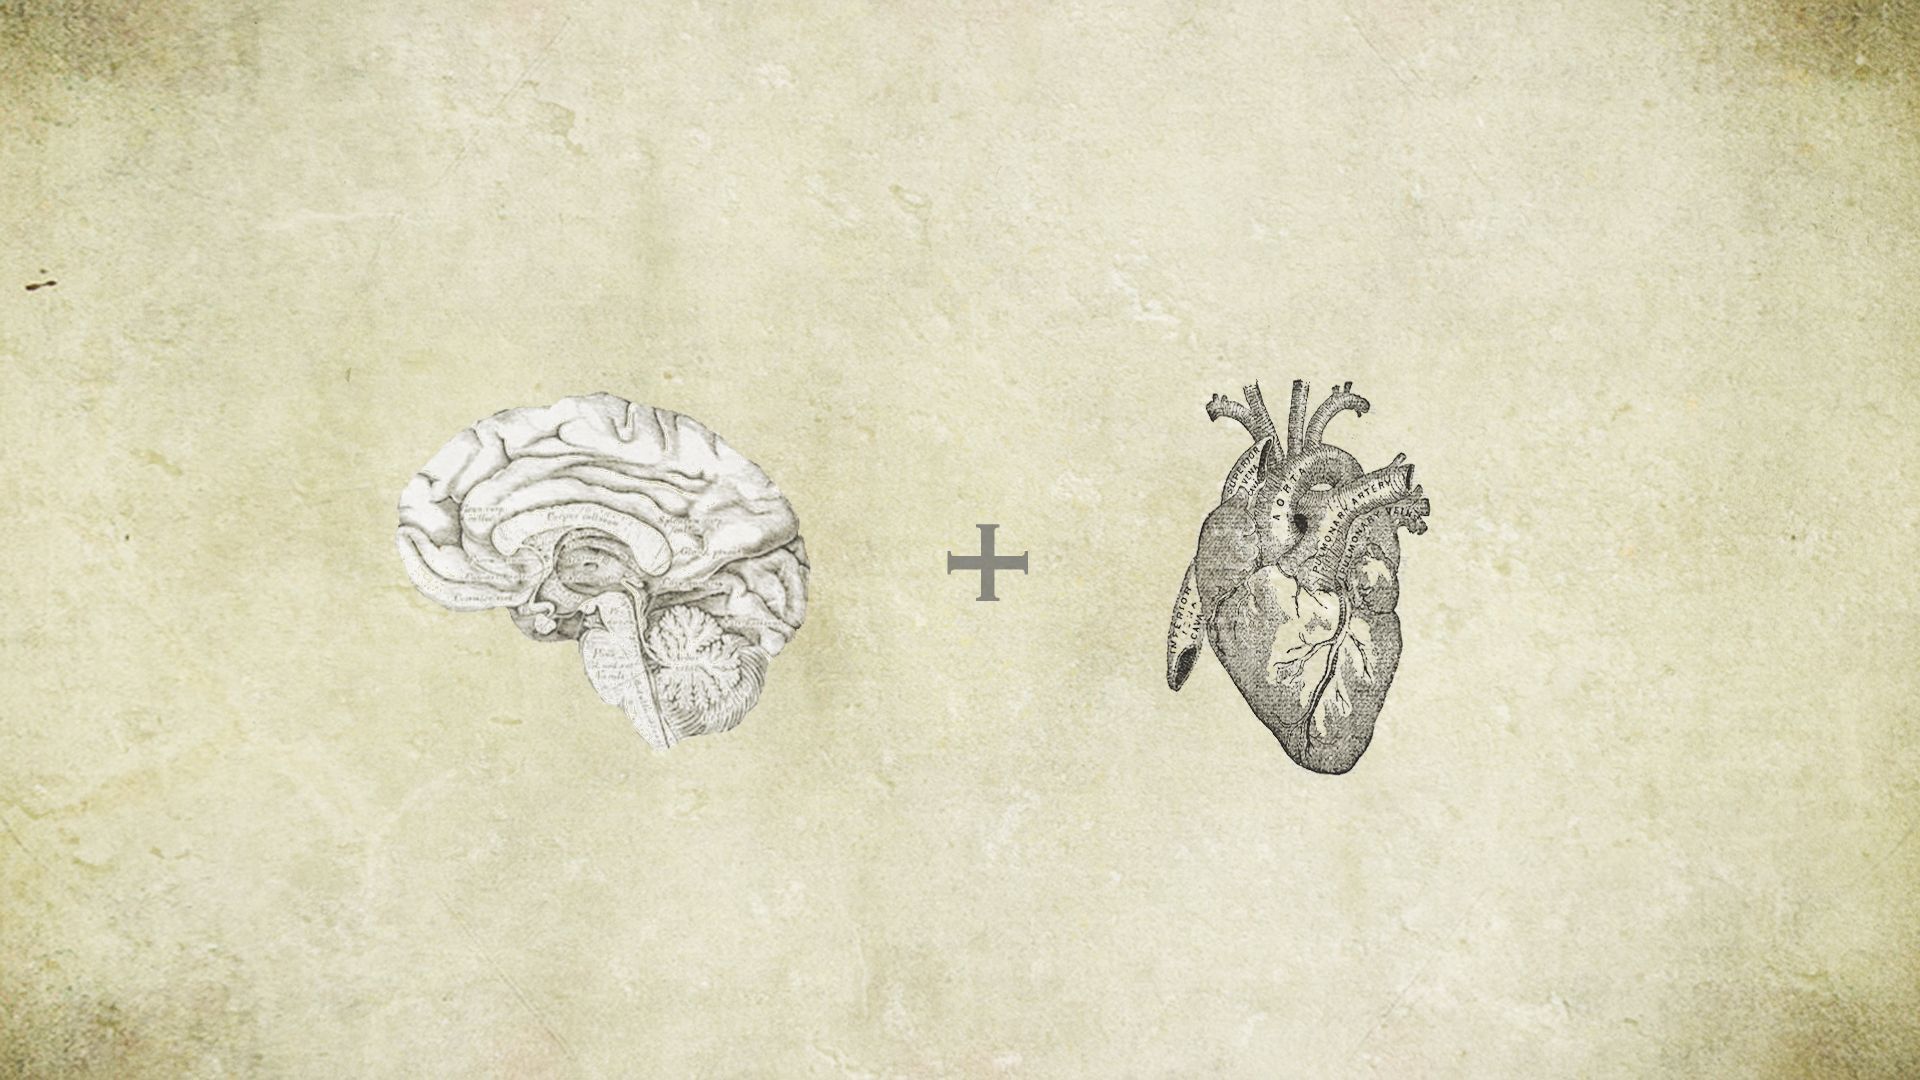 An image of a brain and a heart with a plus sign between them - Anatomy